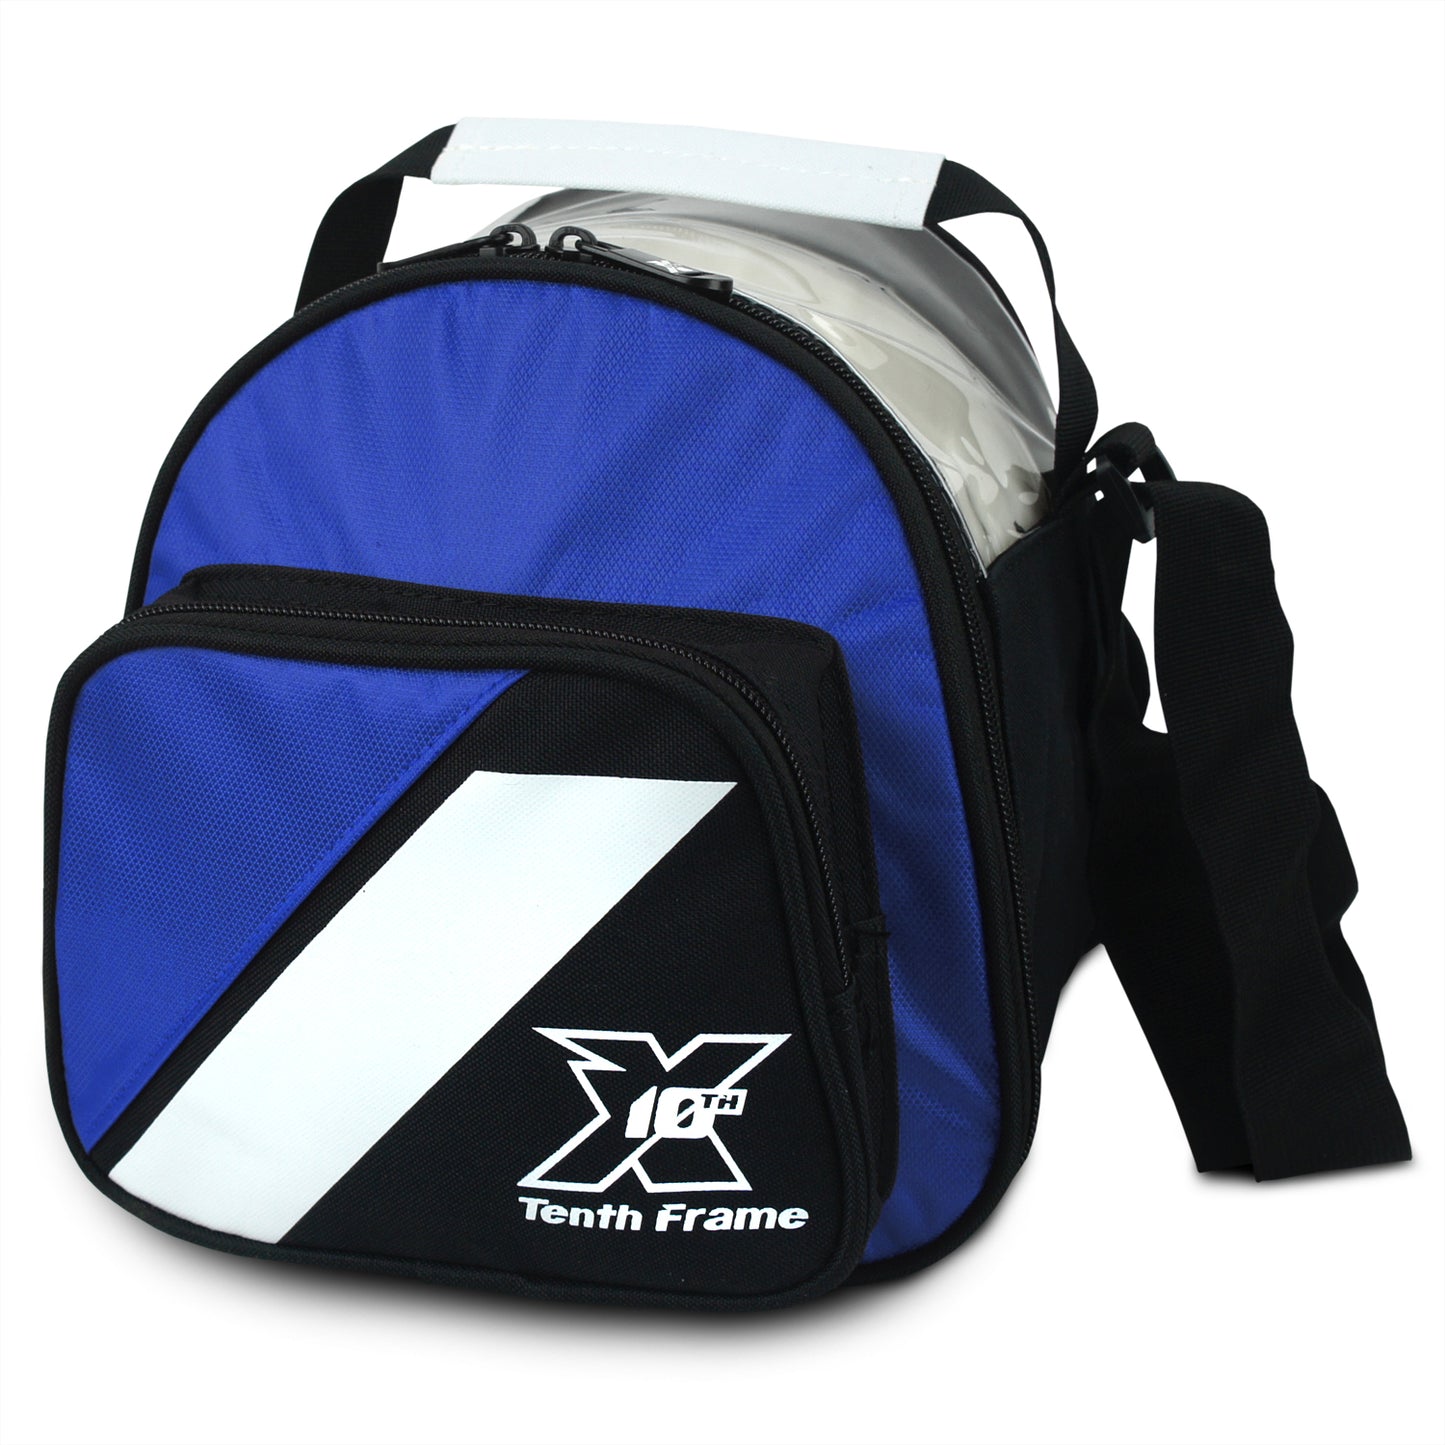 Tenth Frame Deluxe Add-On Bag - 1 Ball Add-On Bowling Bag (Blue)